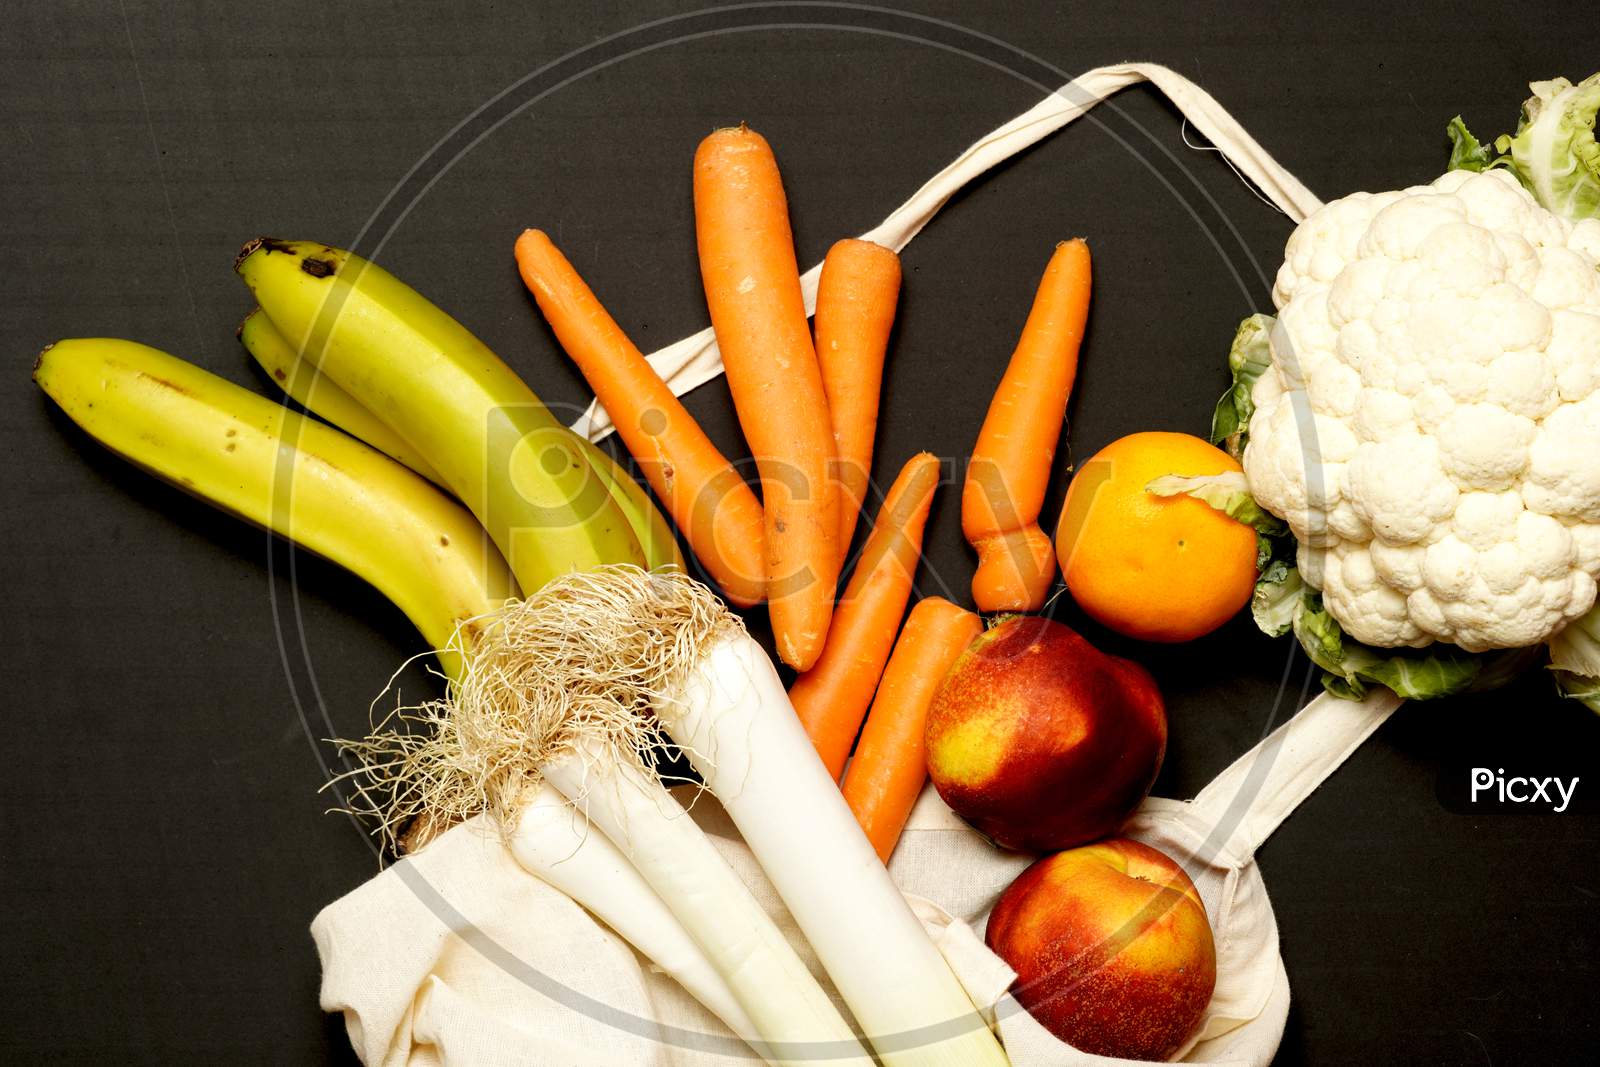 Top View Of Fruits And Vegetables Spilling Out Of A Cloth Shopping Bag. Zero Waste Concept. Flat Lay